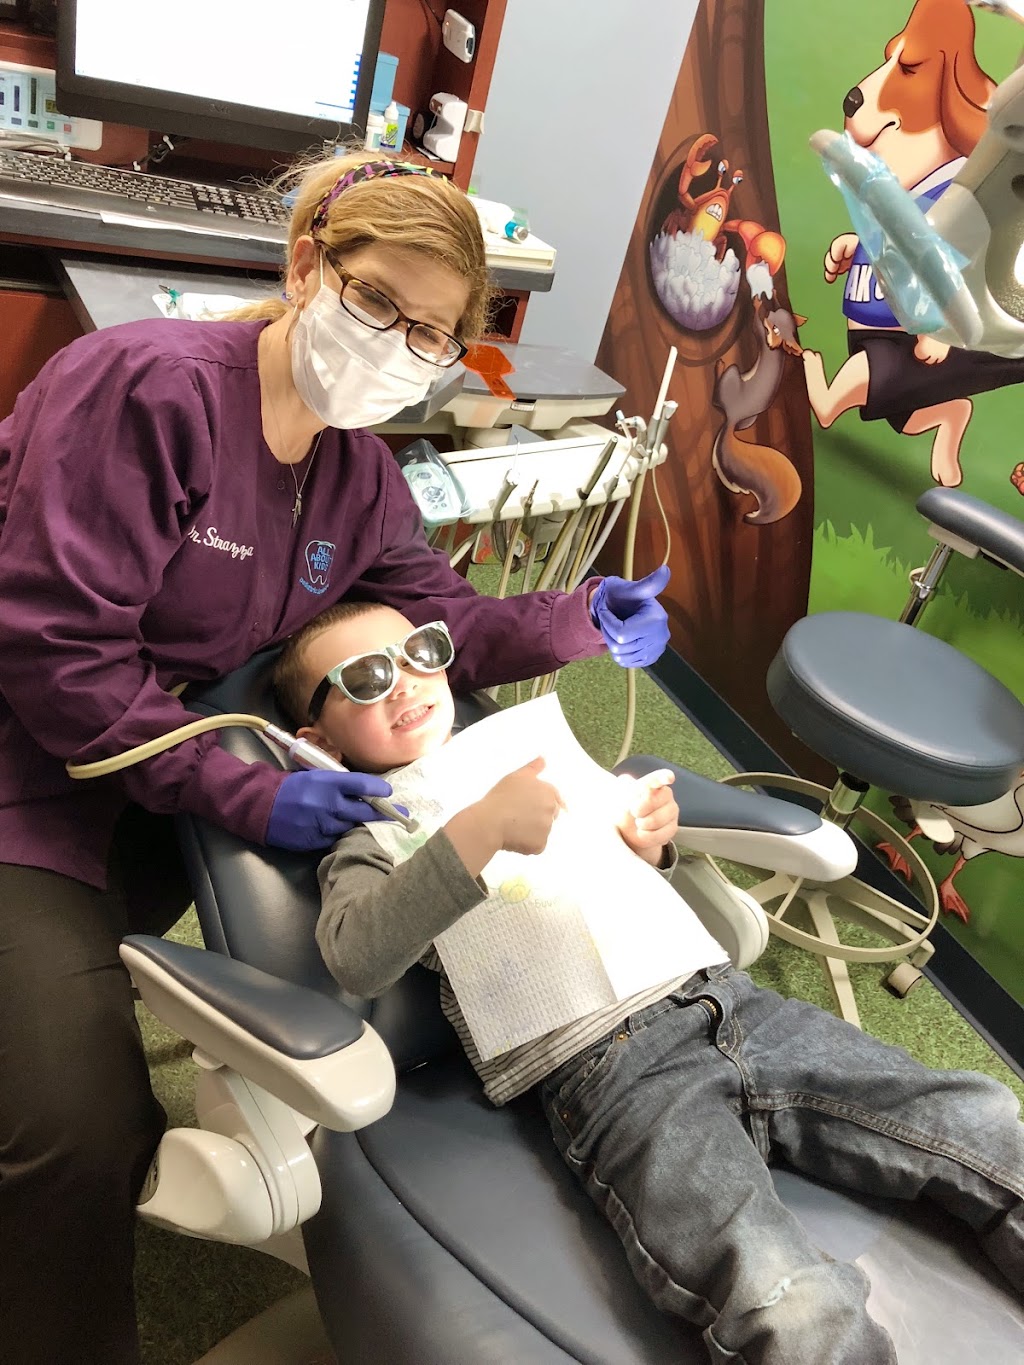 All About Kids Pediatric Dentistry and Orthodontics - Derby | 36 Division St, Derby, CT 06418 | Phone: (203) 323-5439